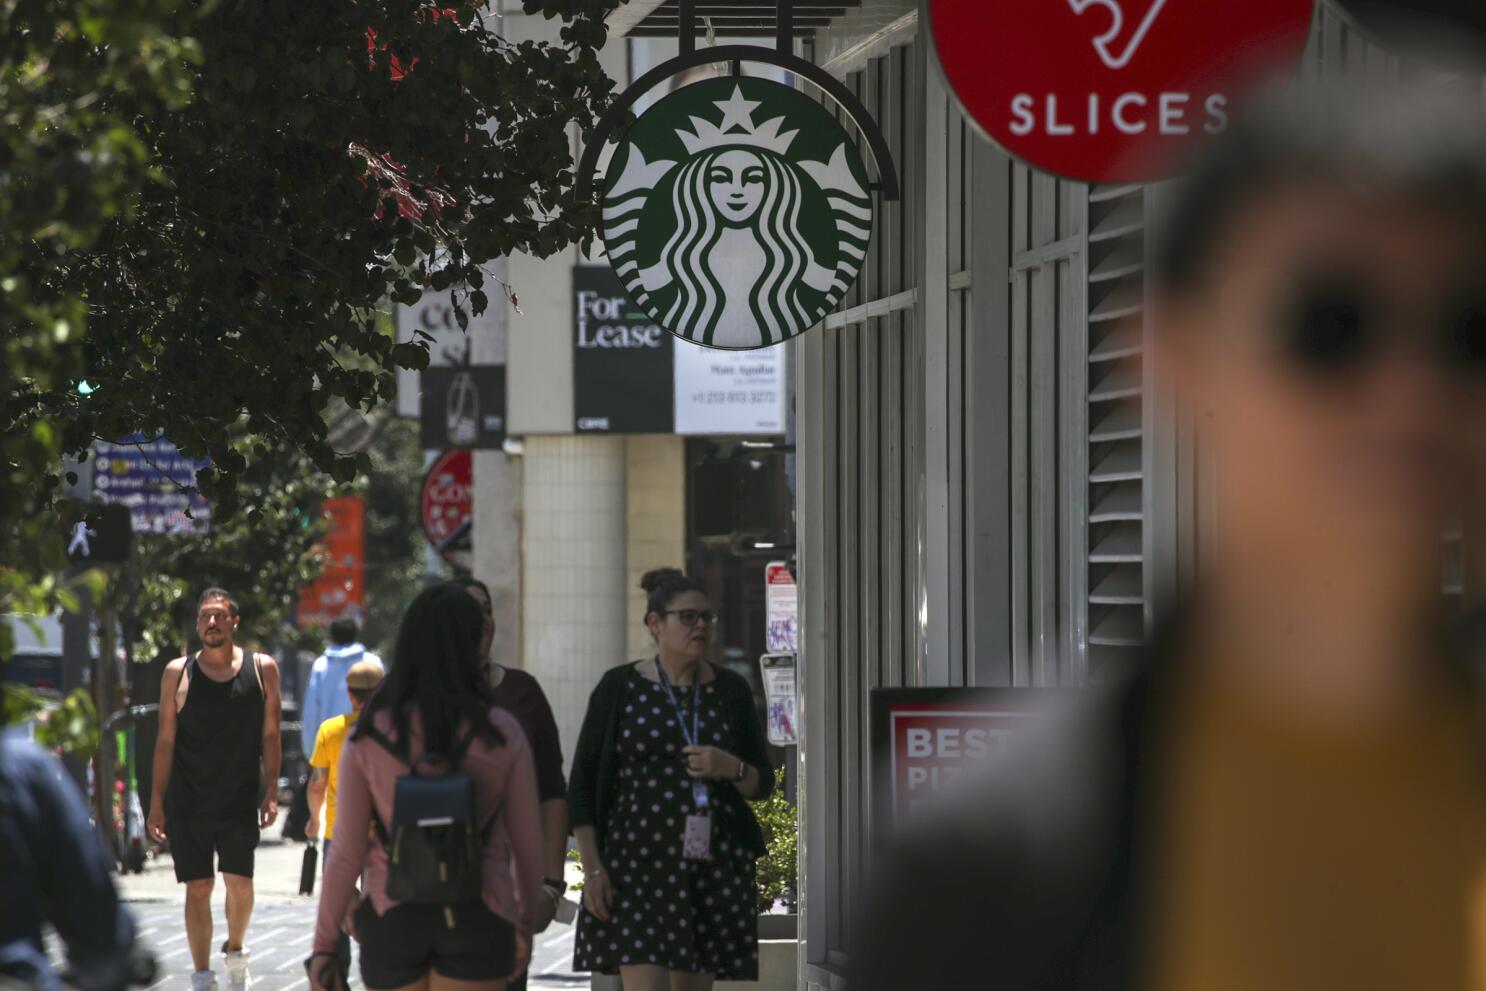 See the list of Starbucks' 28 California shops that will strike on